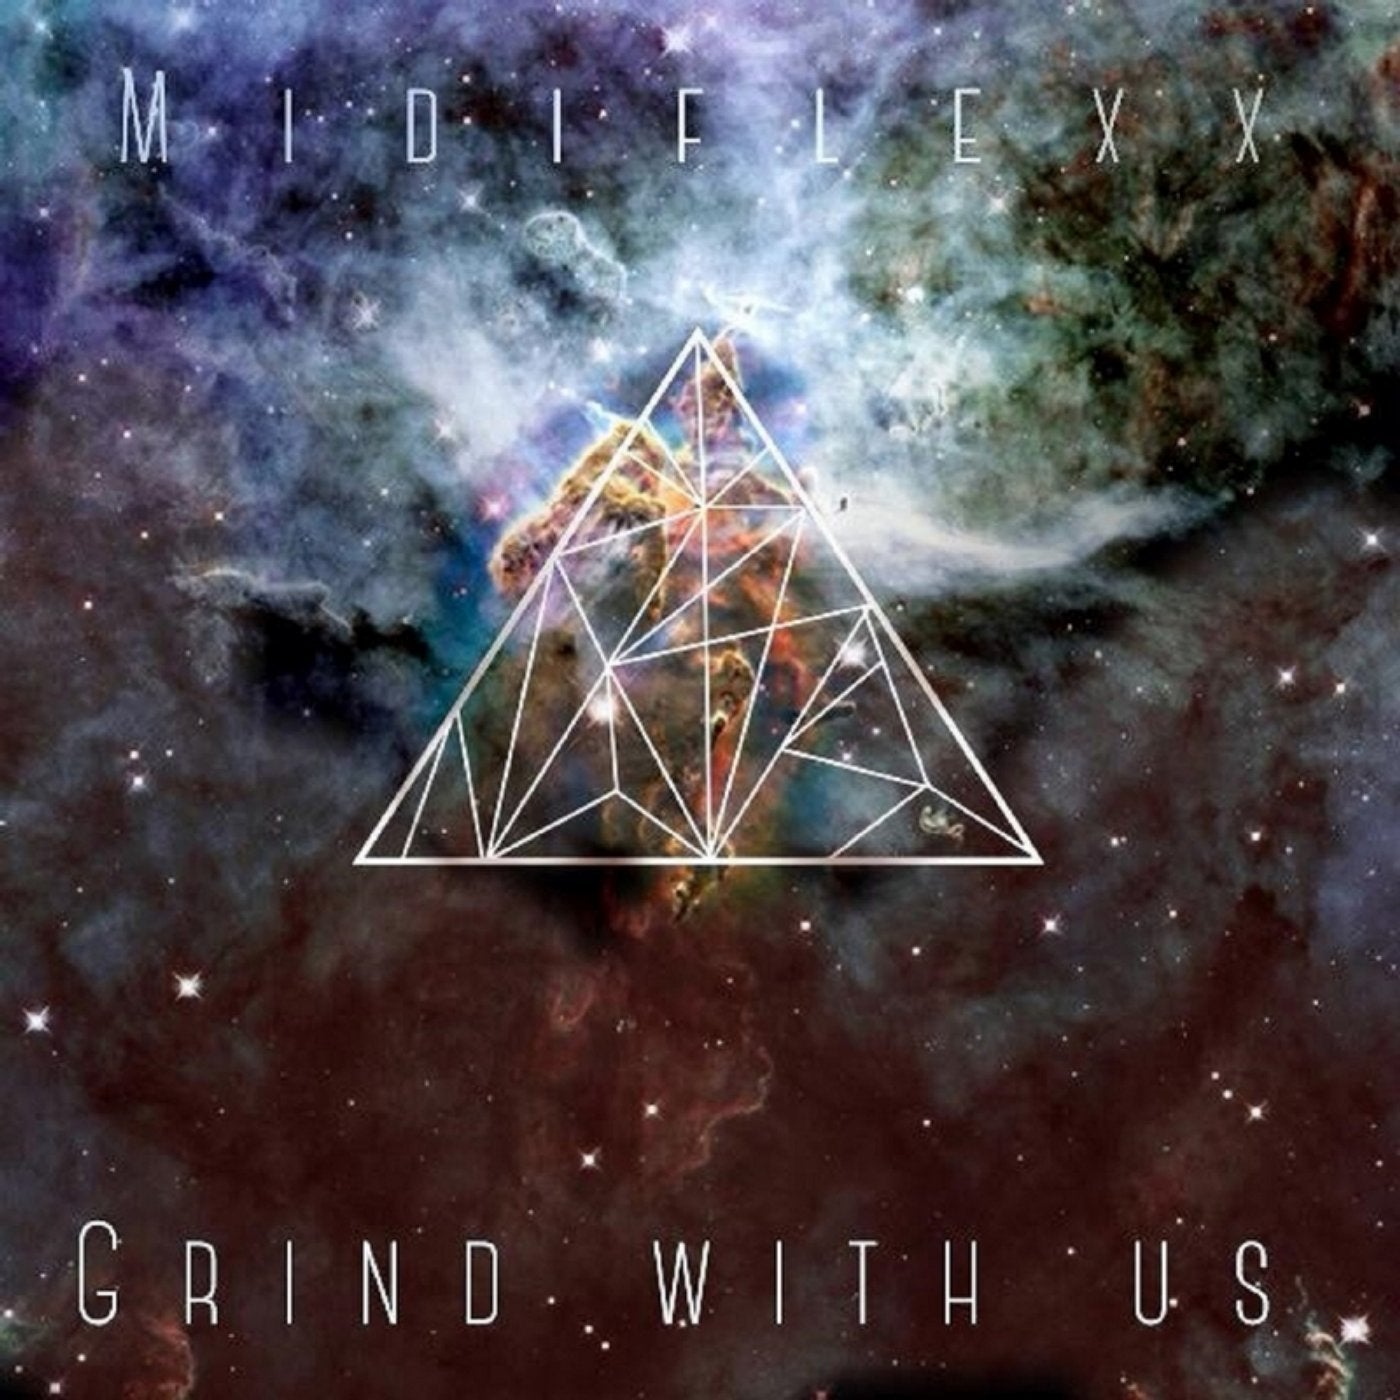 Grind With Us